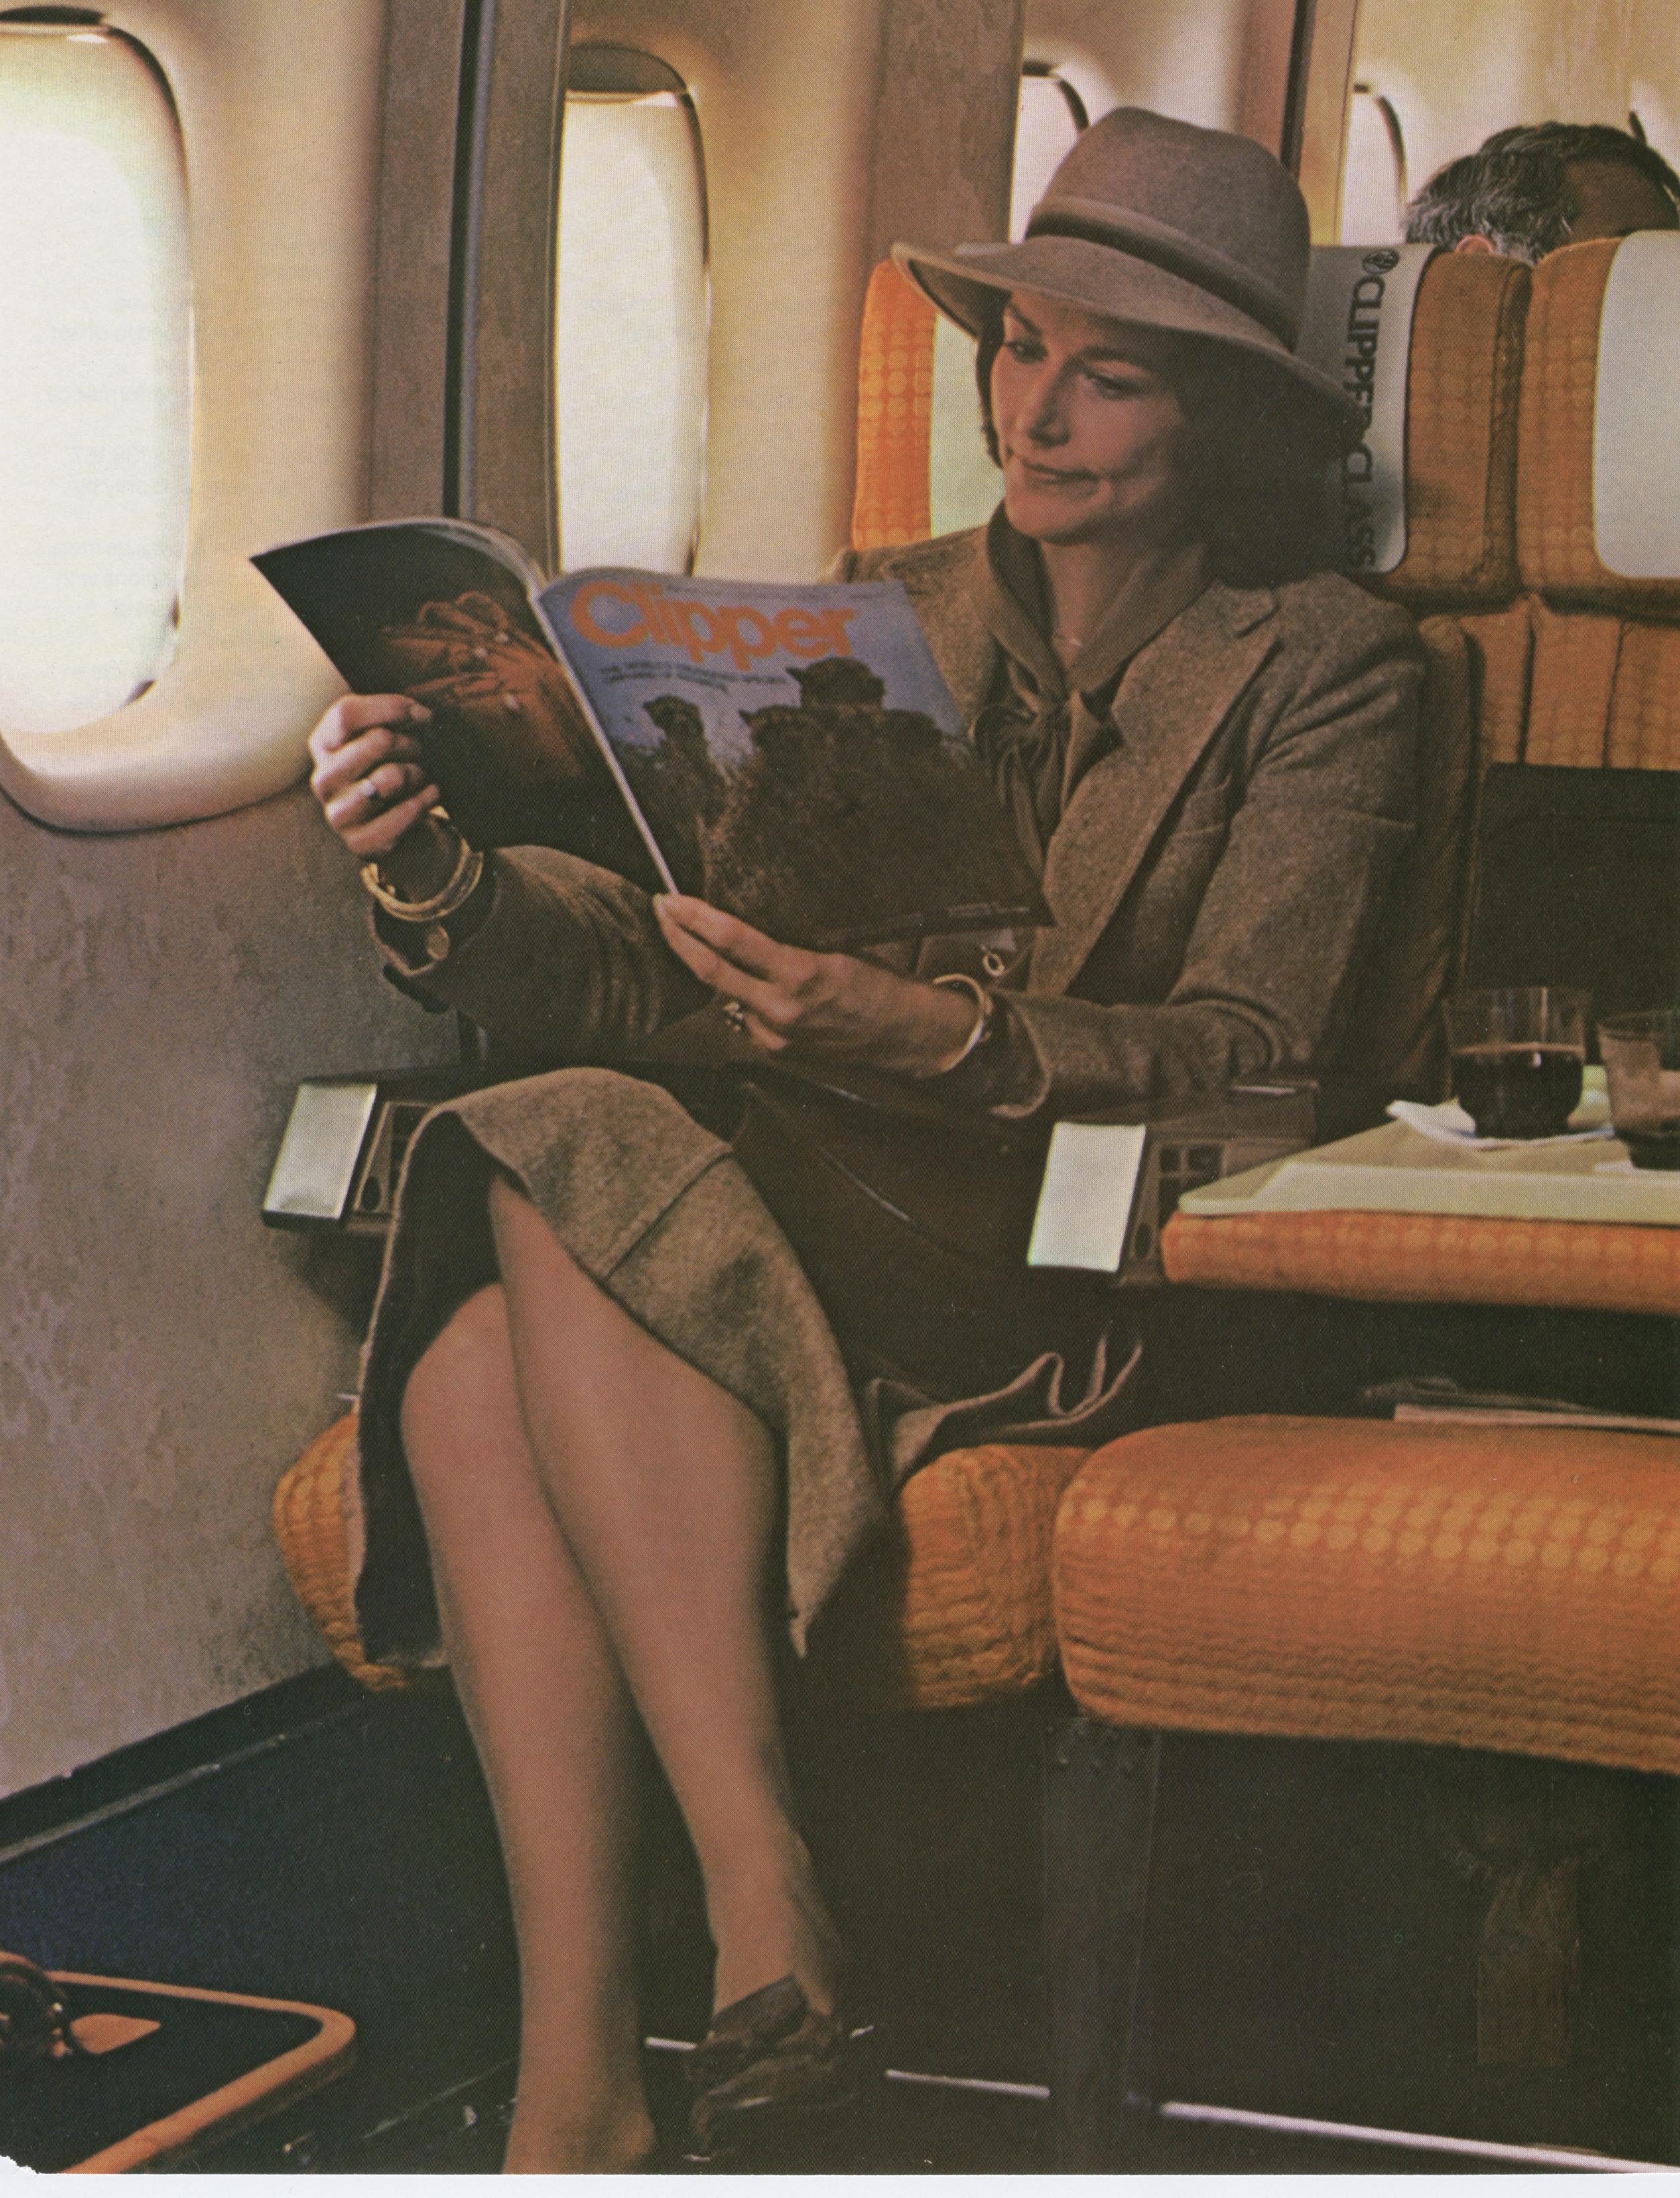 1979 An early version of Pan Am's Clipper Class (Business Class) with economy seats.  In 1980 Pan Am would introduce a larger Clipper Class seat.